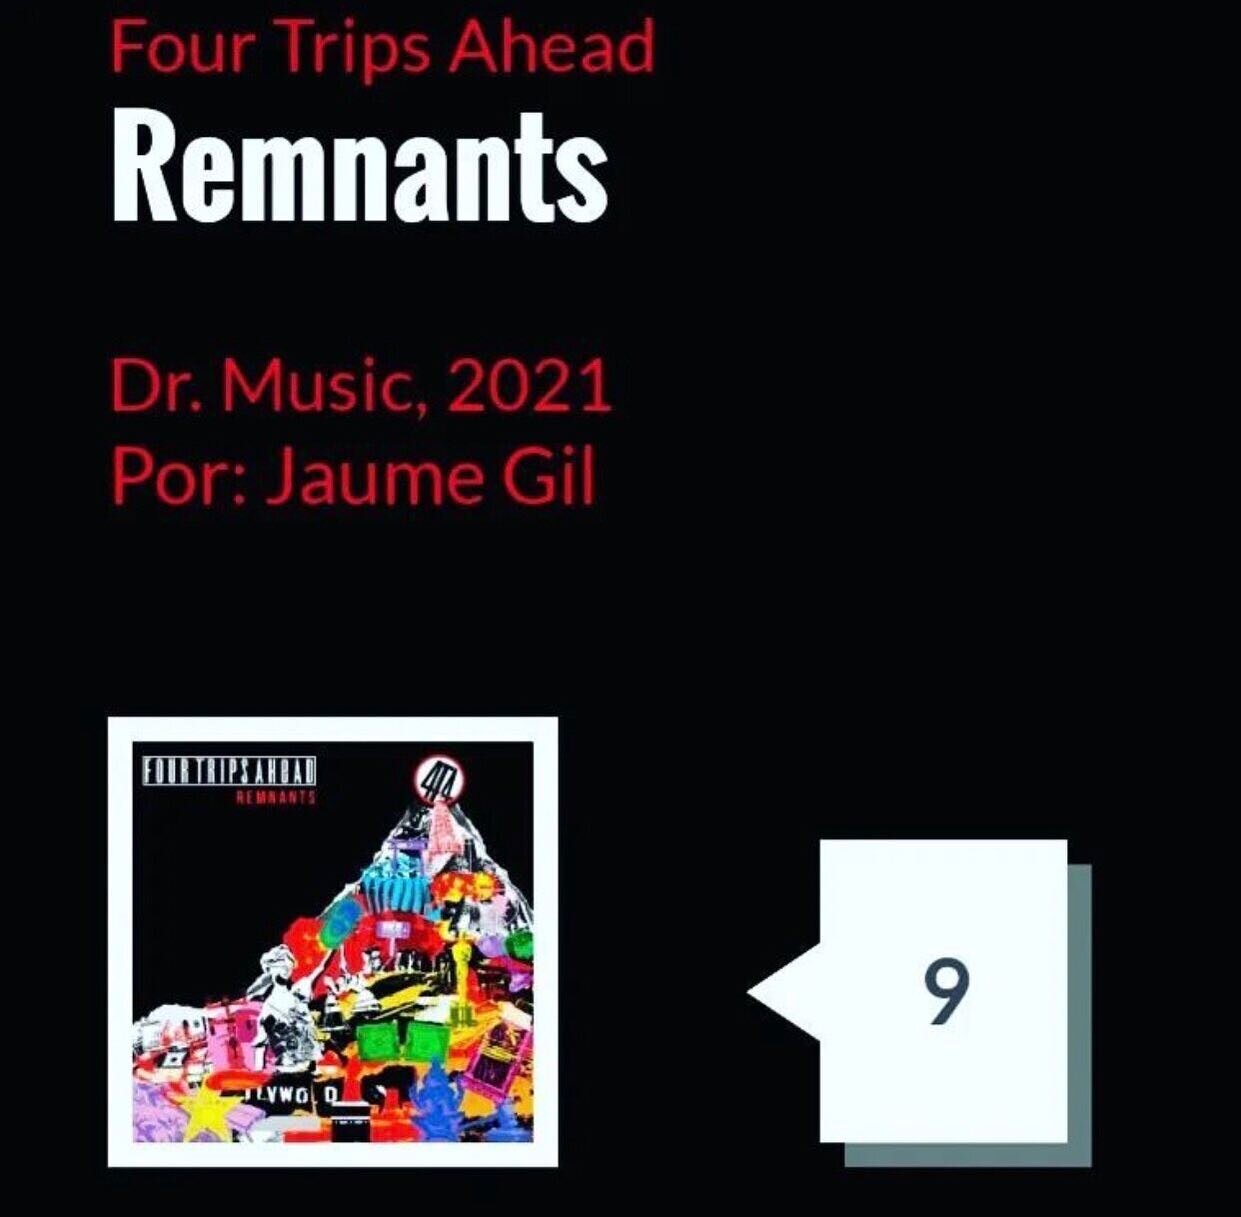 Thanks so much to Jaume Gil and everyone @mariskalrock for the support for our latest release, REMNANTS. You ROCK.

#RemnantsEP #MariskalRock #Review #SpainRocks #HeavyRock #HardRock #ProgRock #HeavyMetal #ReclaimRockMusic 

Read it here&mdash;https: